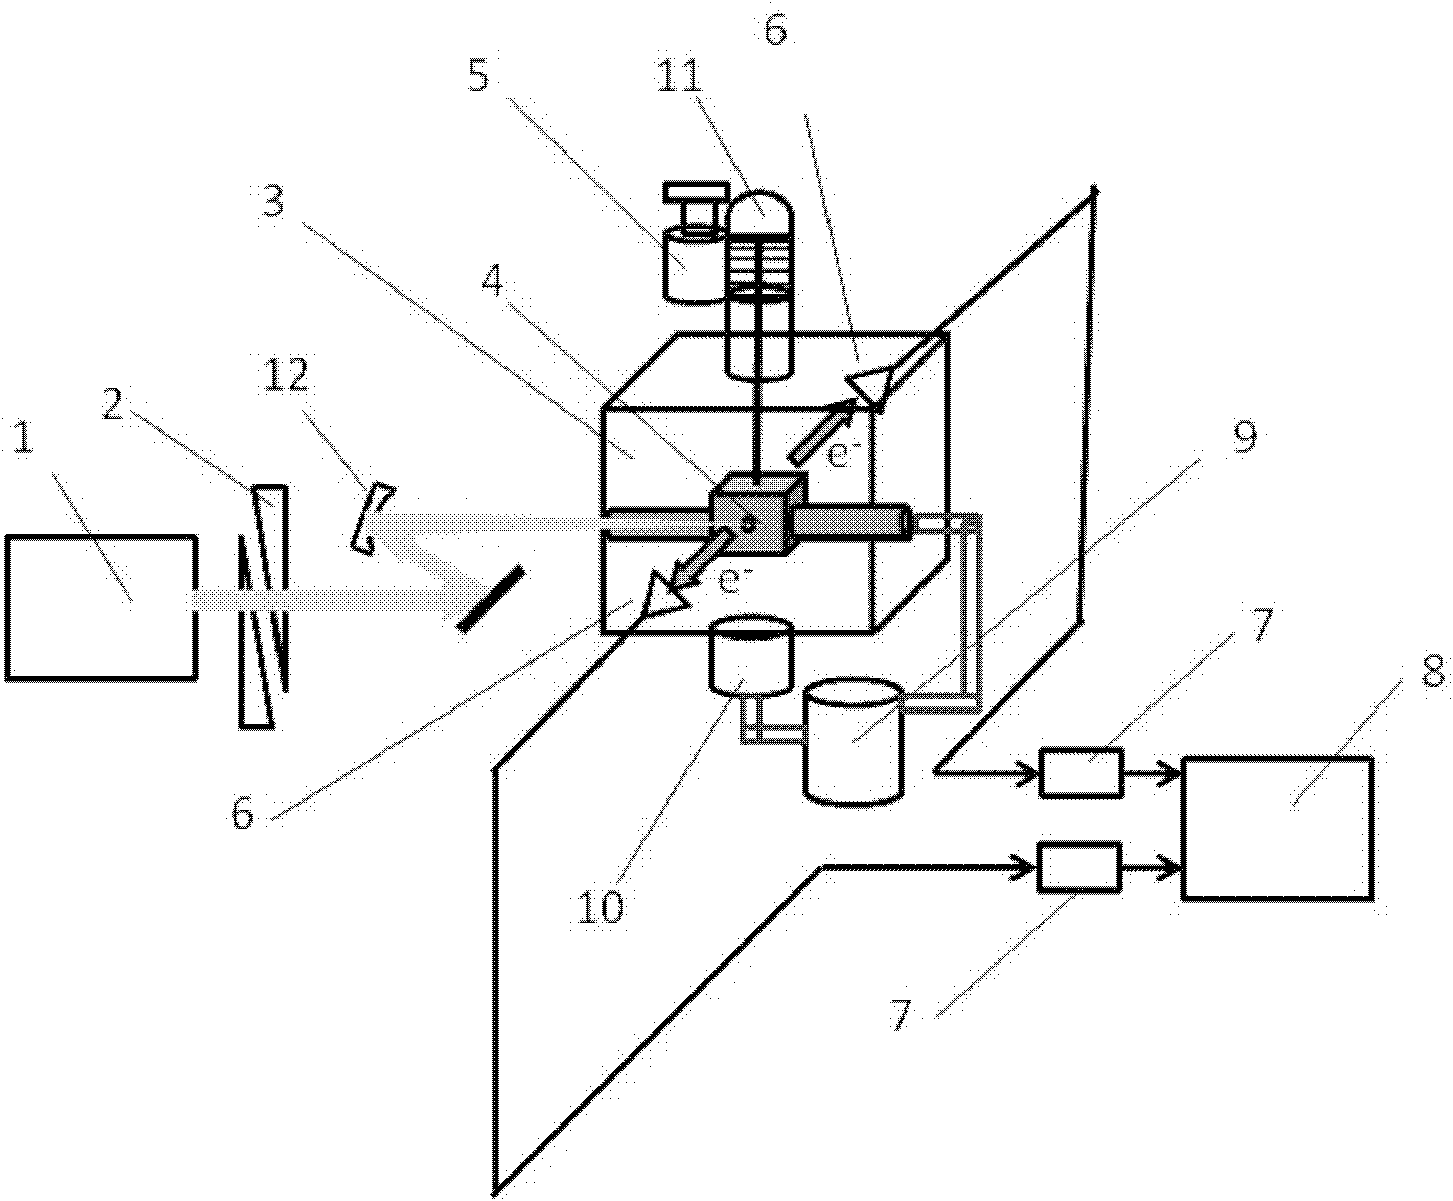 Photoionization device for measuring absolute phase of carrier envelope of optical pulse